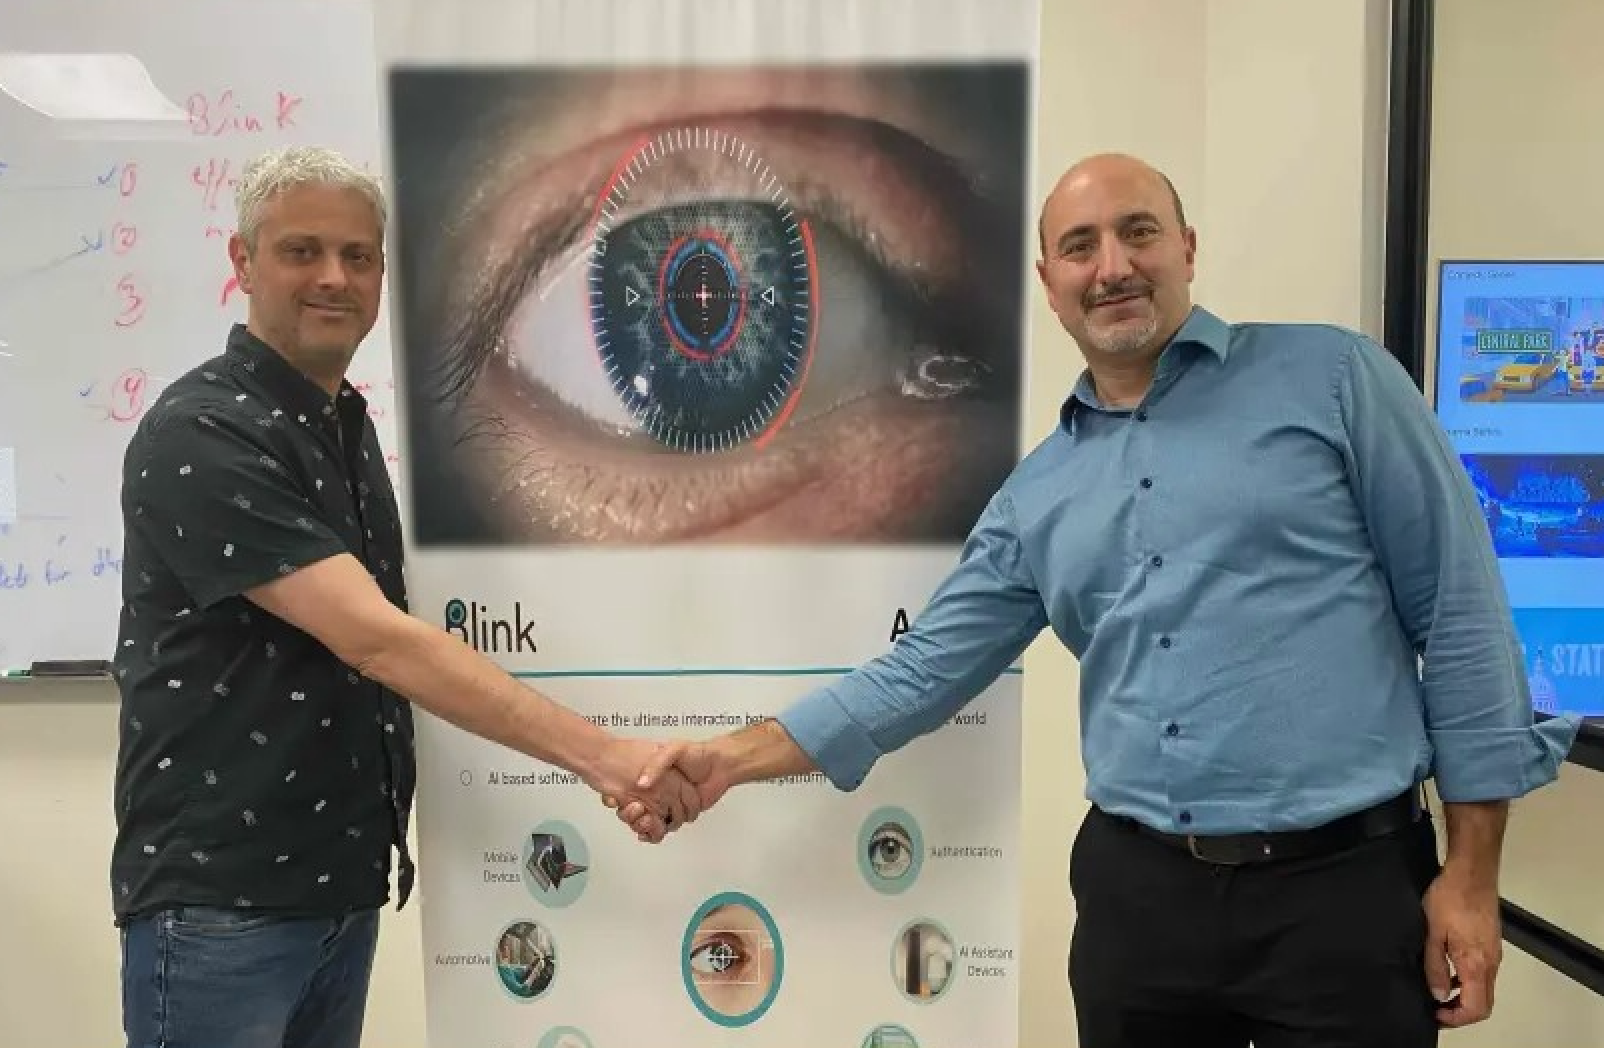 CEOs shaking hands (Blink CEO Oren Yogev on the left, with Yagen, CEO of Shamir Optical).